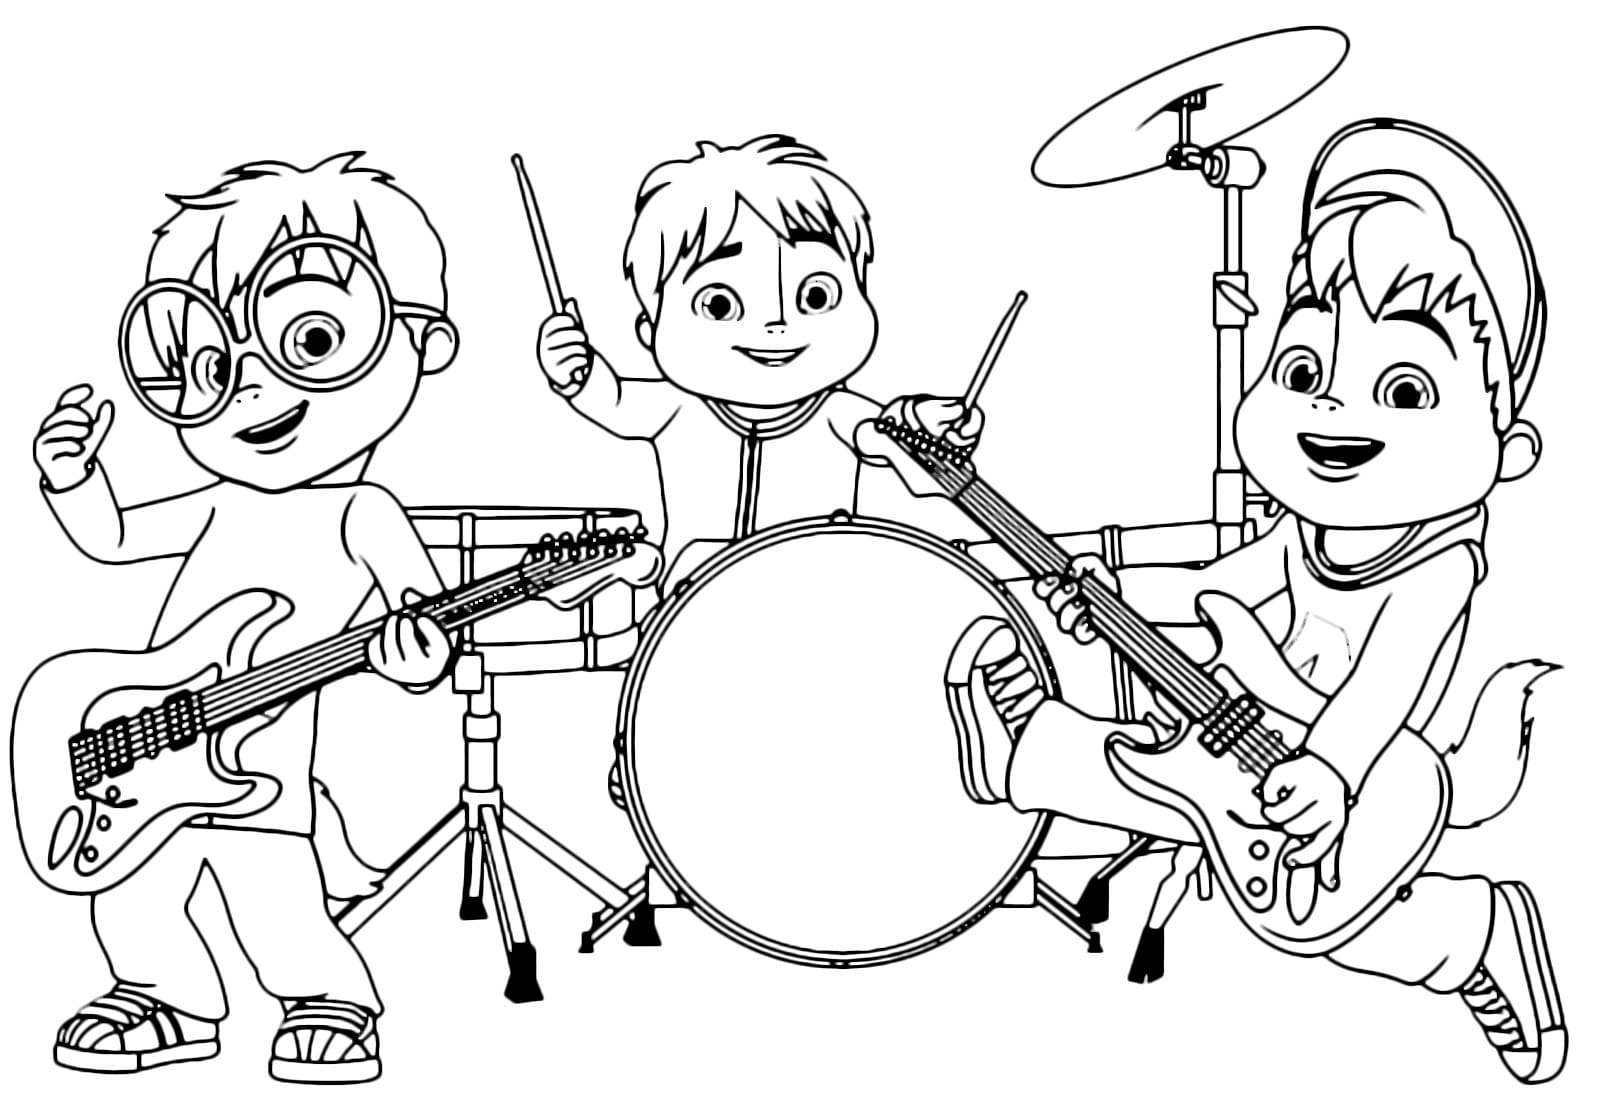 alvin-and-the-chipmunks-coloring-pages-print-in-a4